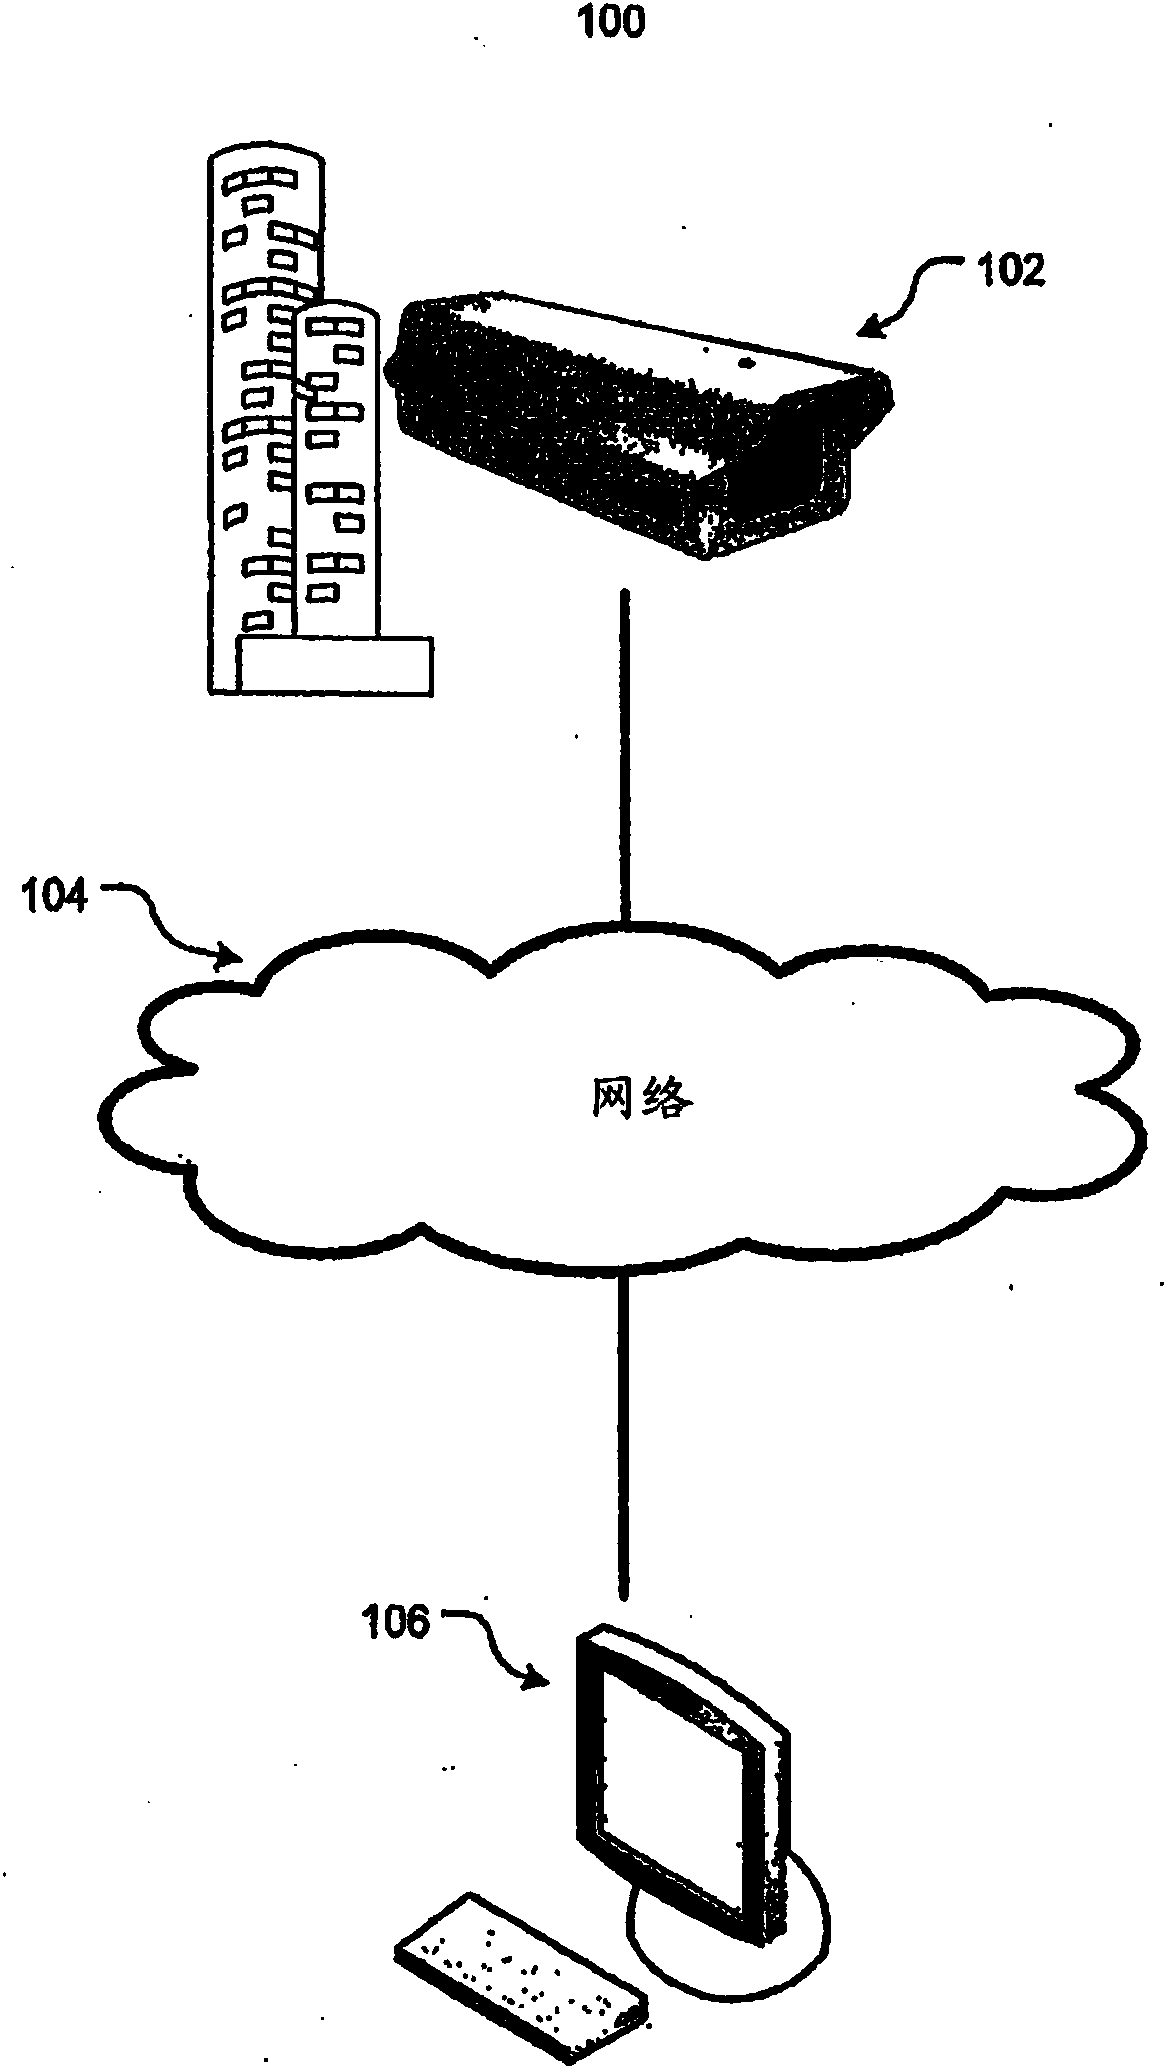 Method and system for video coding with noise filtering of foreground object segmentation